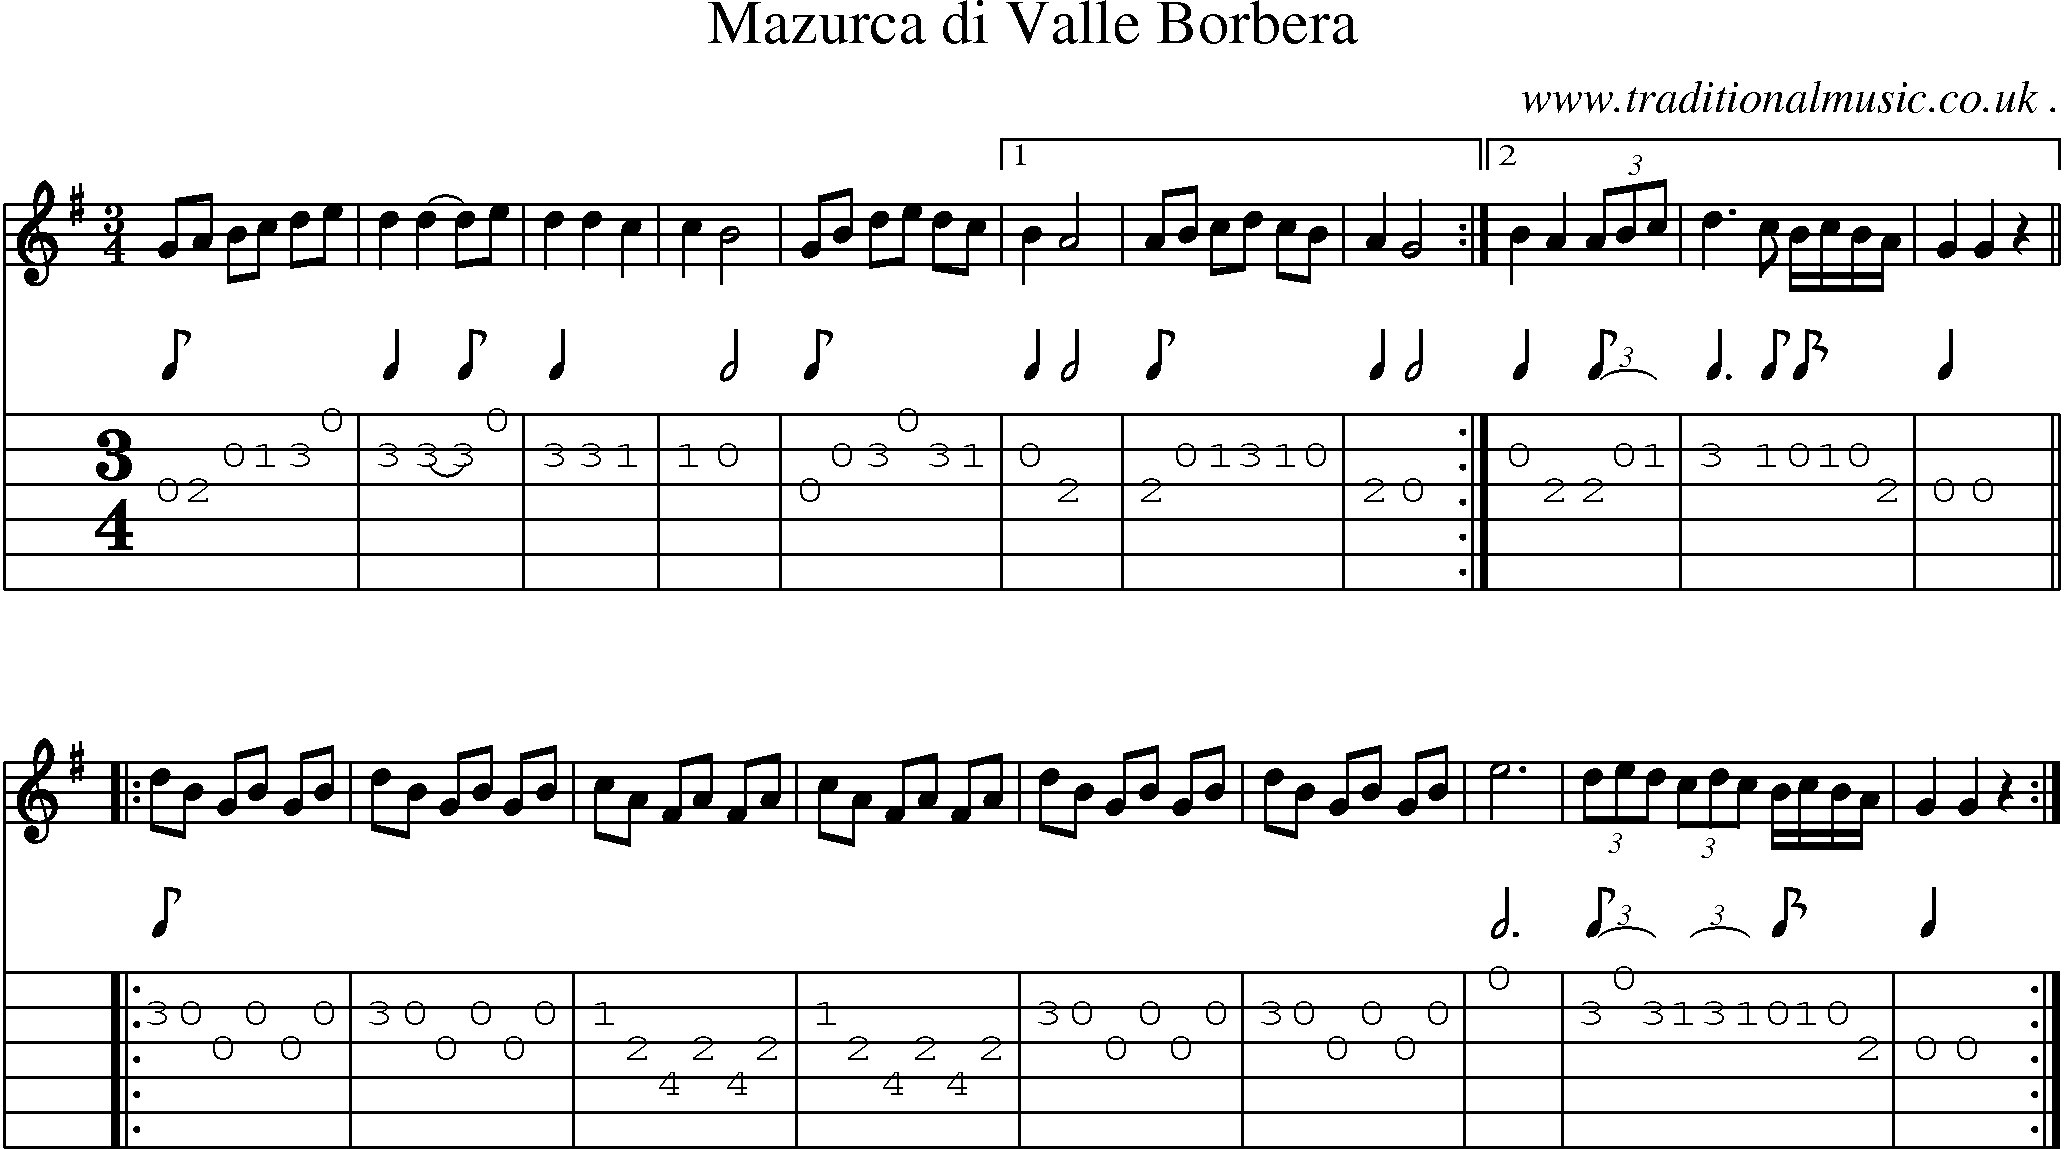 Sheet-Music and Guitar Tabs for Mazurca Di Valle Borbera